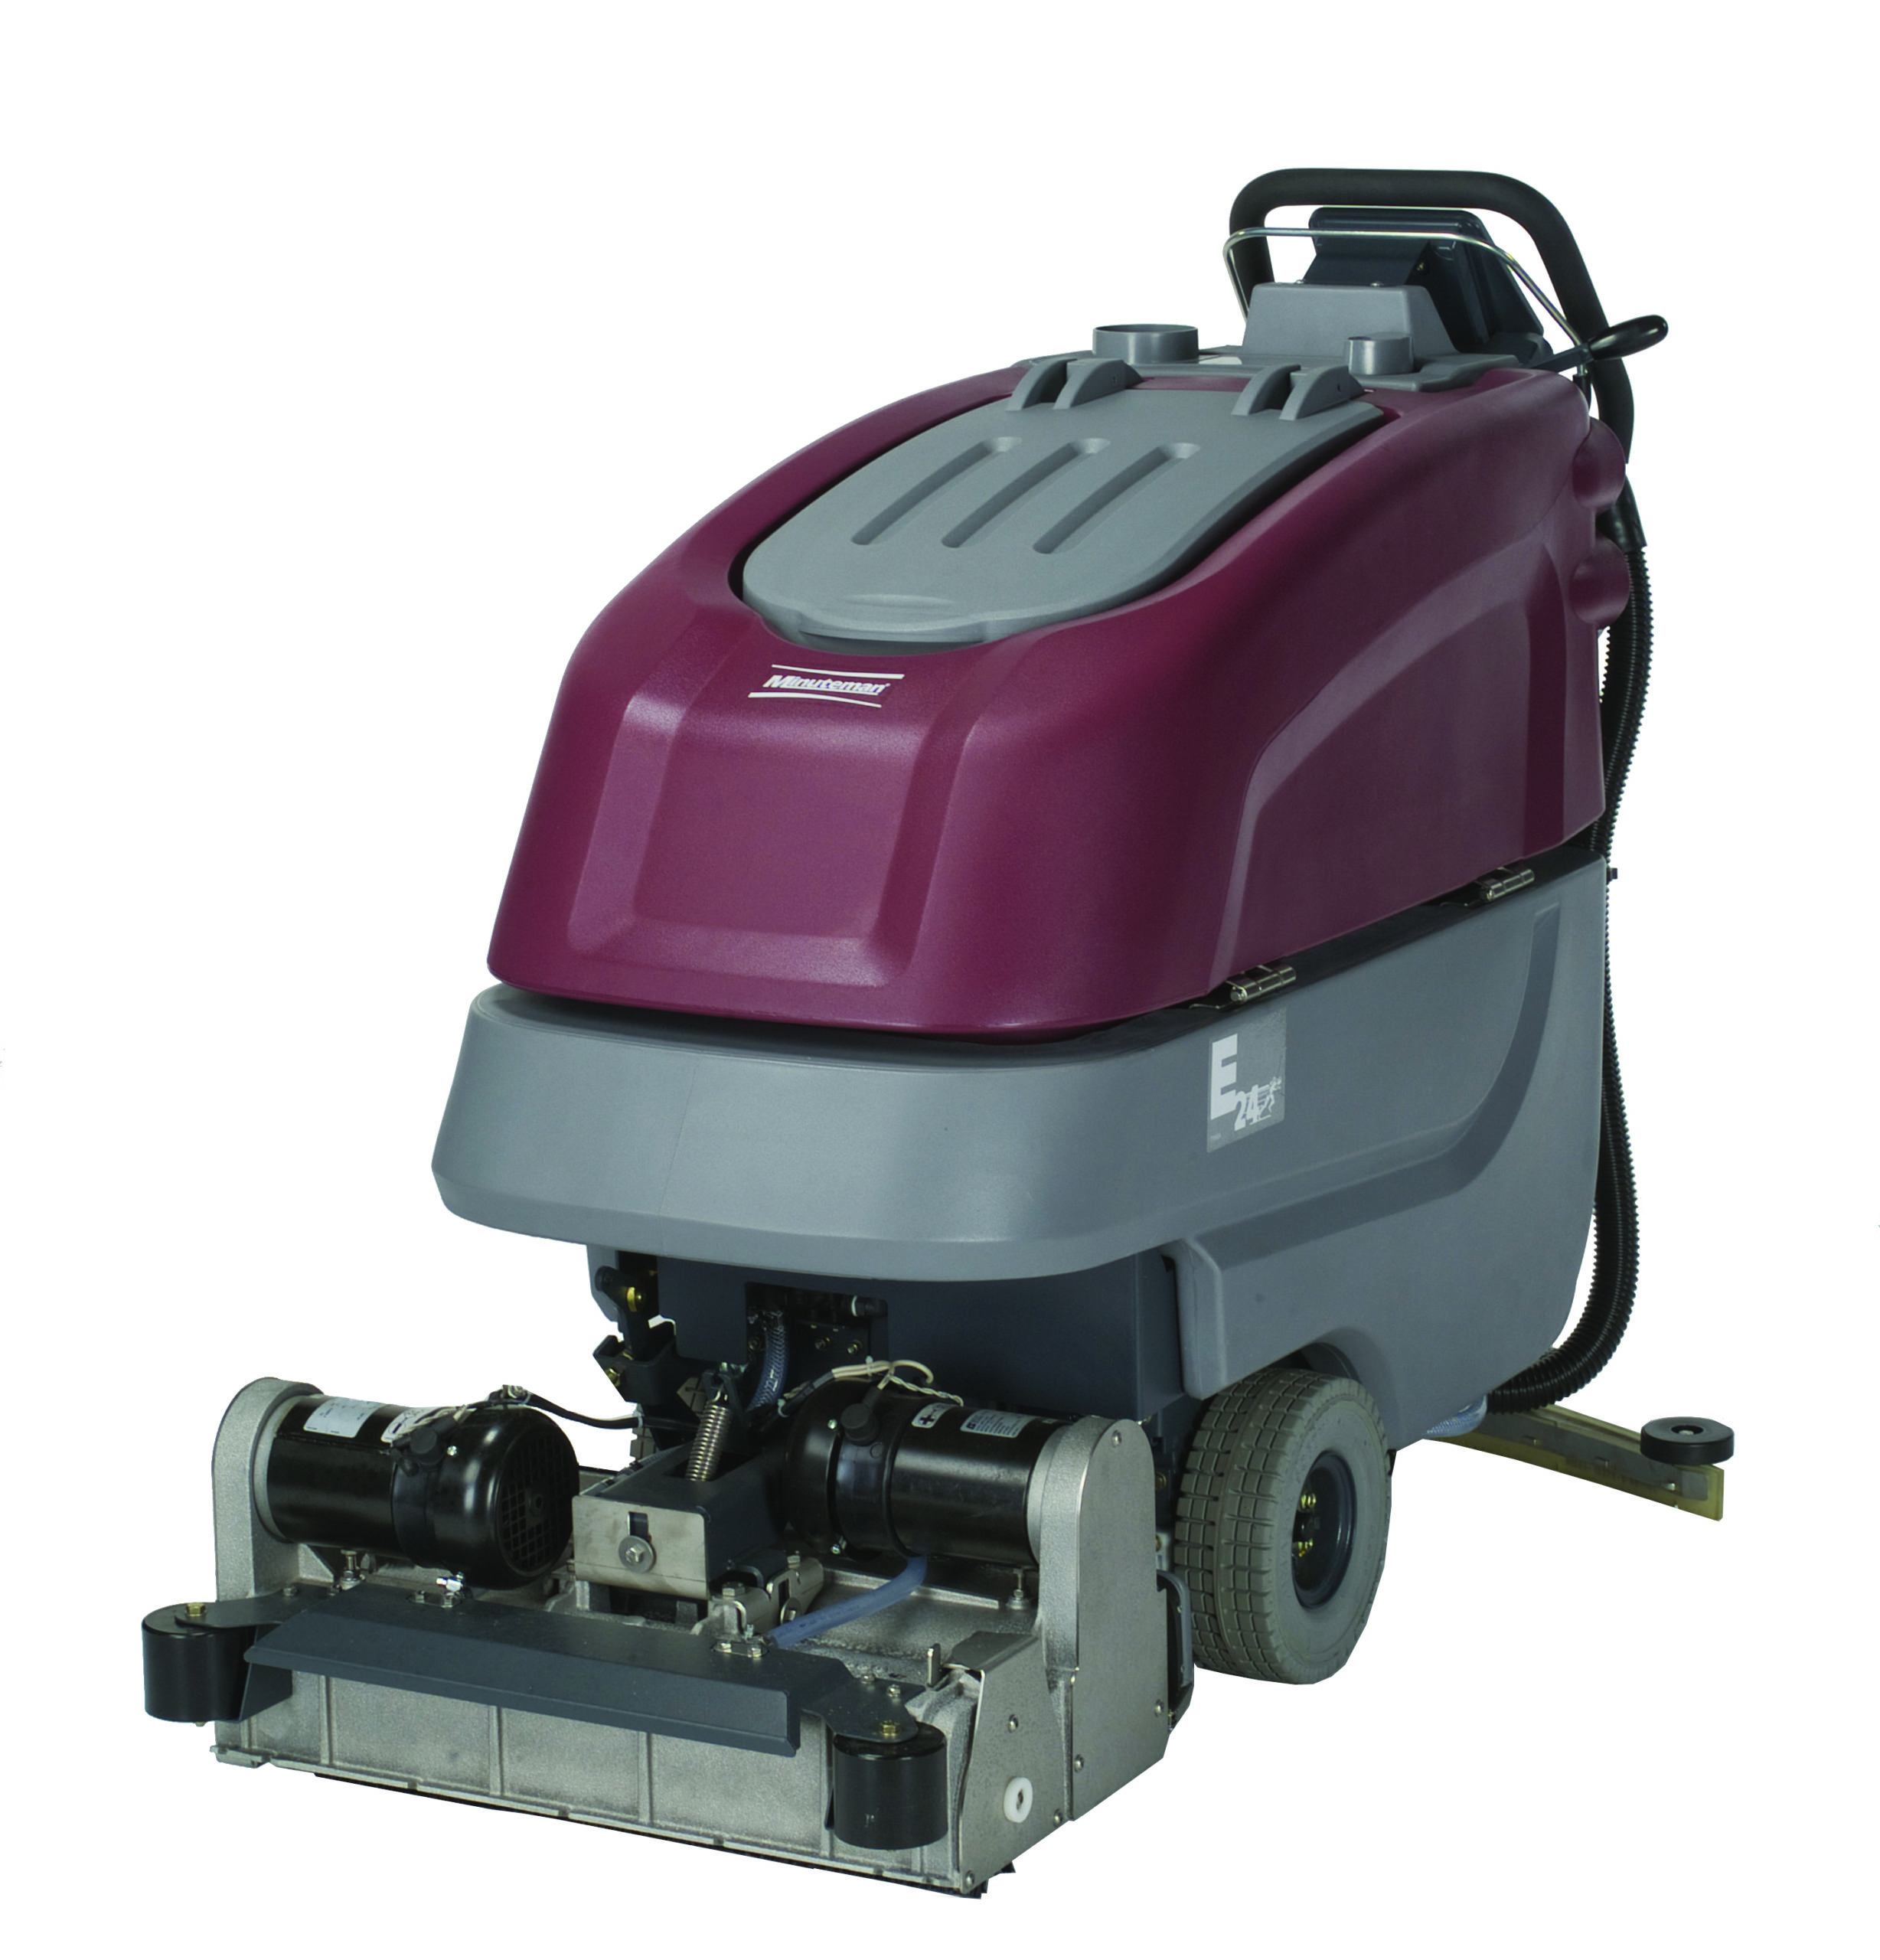 What type of detergent or soap should I use in a floor scrubber?